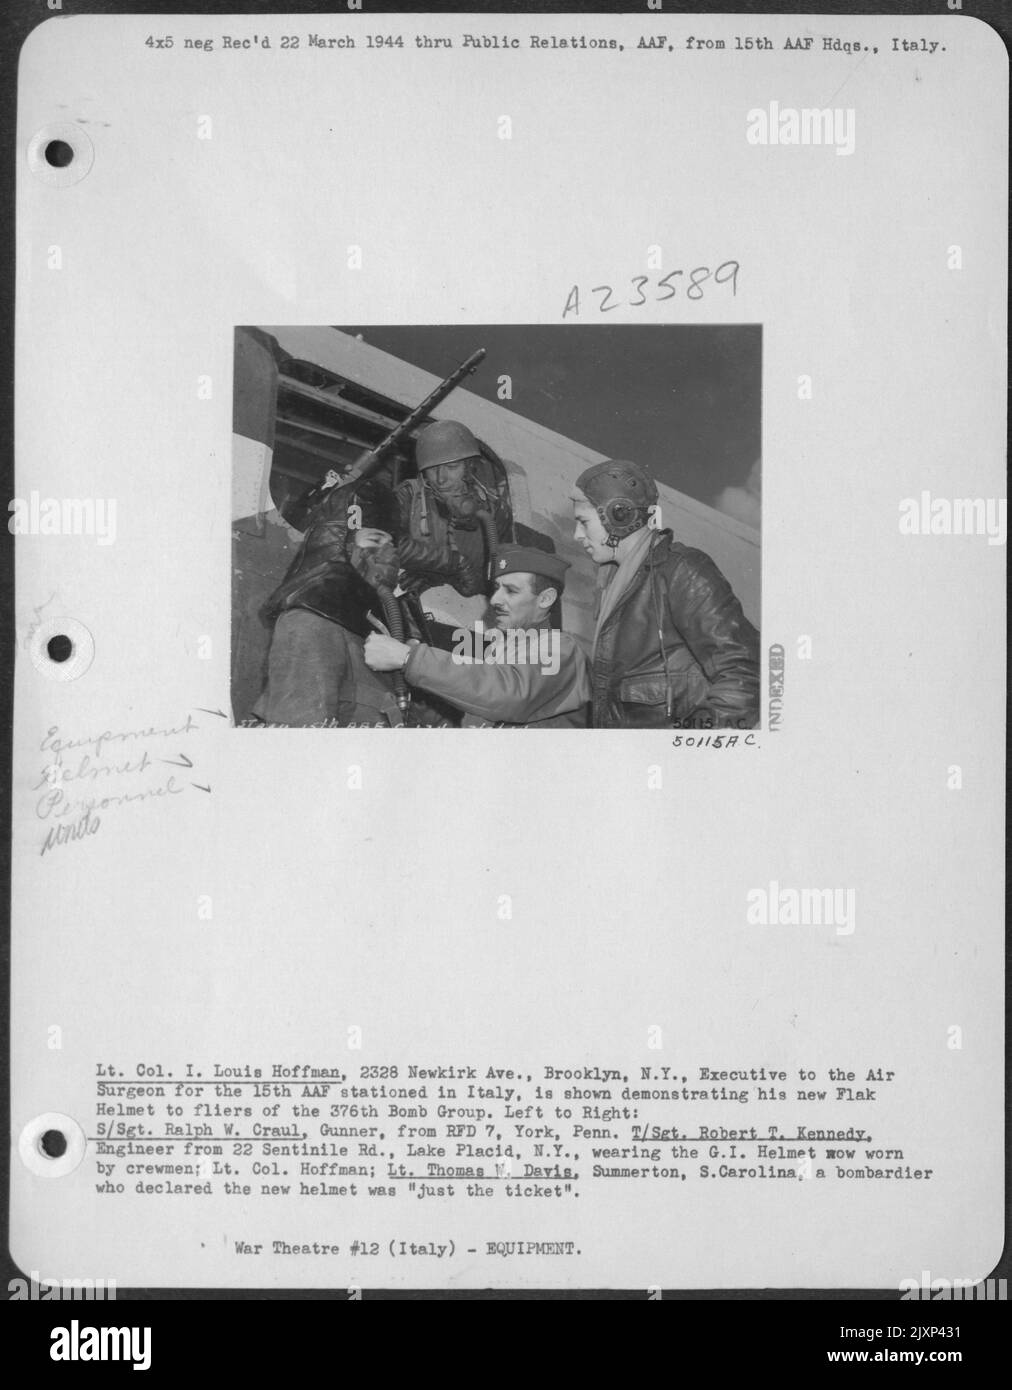 Lt. Col. I. Louis Hoffman, 2328 Newkirk Ave., Brooklyn, N.Y., Executive to the Air Surgeon for the 15th AAF stationed in Italy, is shown demonstrating his new Flak Helmet to fliers of the 376th Bomb Group. Left to Right: S/Sgt. Ralph W. Craul, Gunner Stock Photo